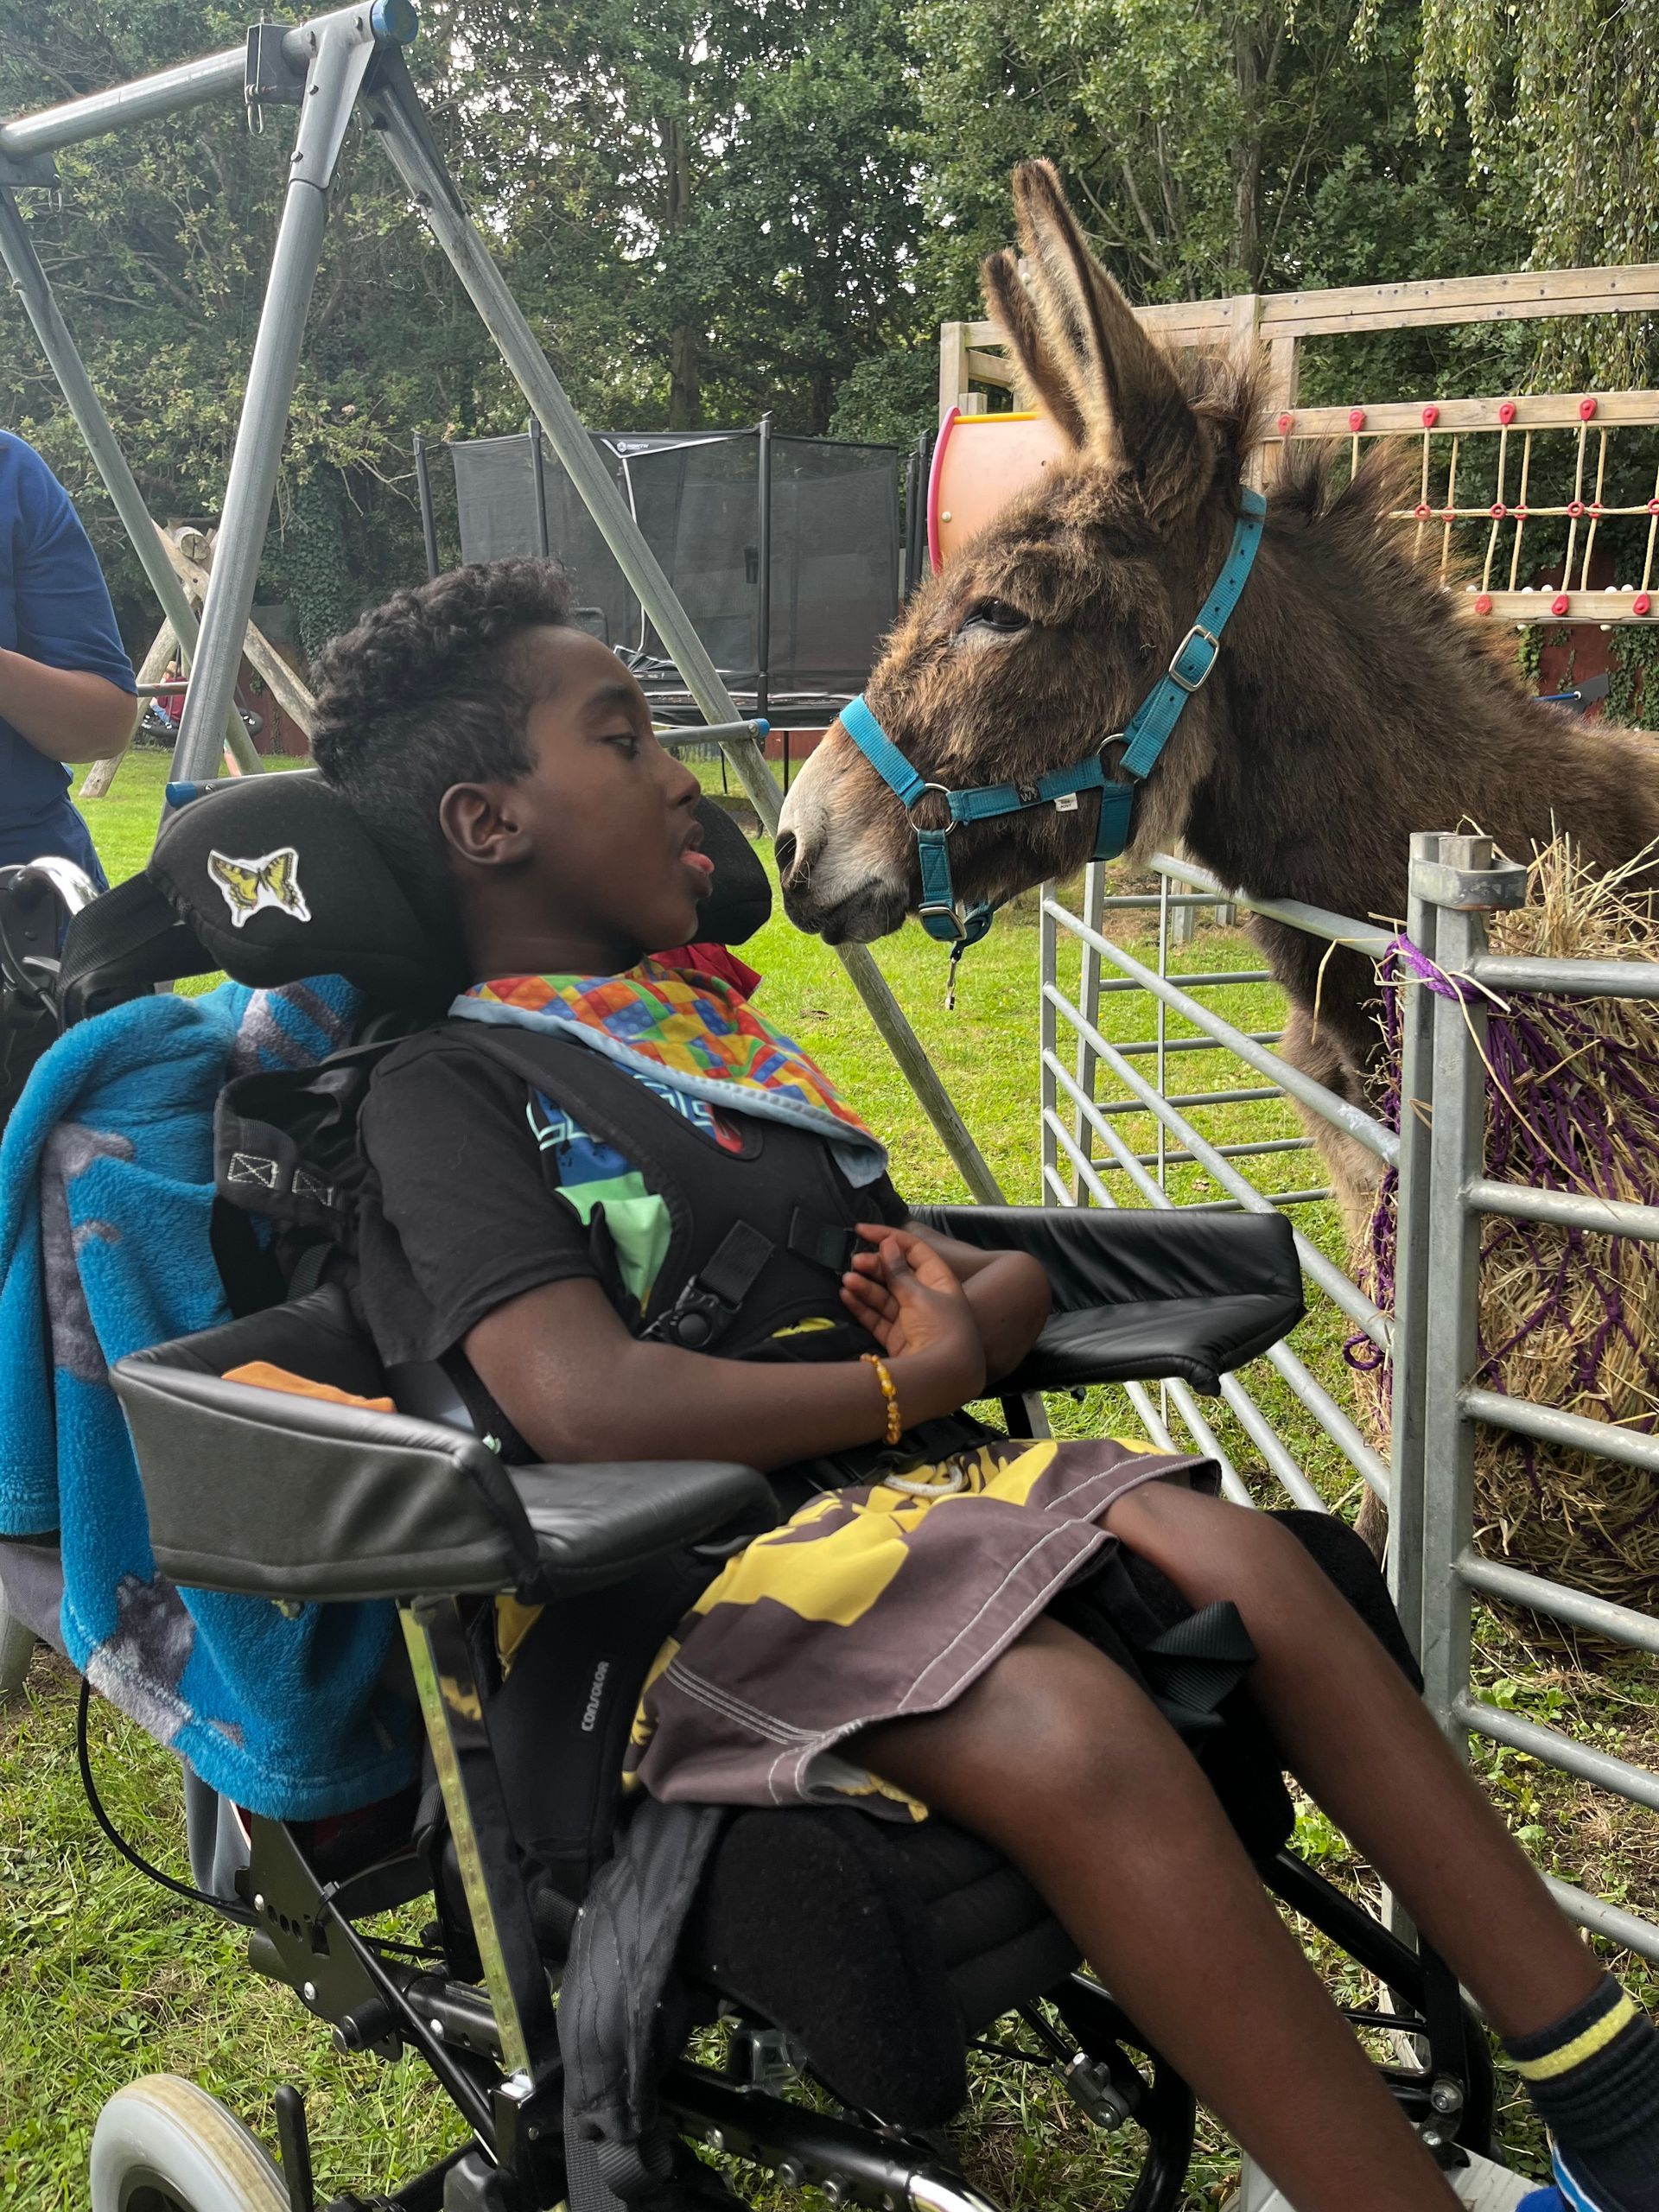 A visit from the Isle of Wight Donkey Sanctuary to a special needs school where the residents are really enjoying donkey therapy